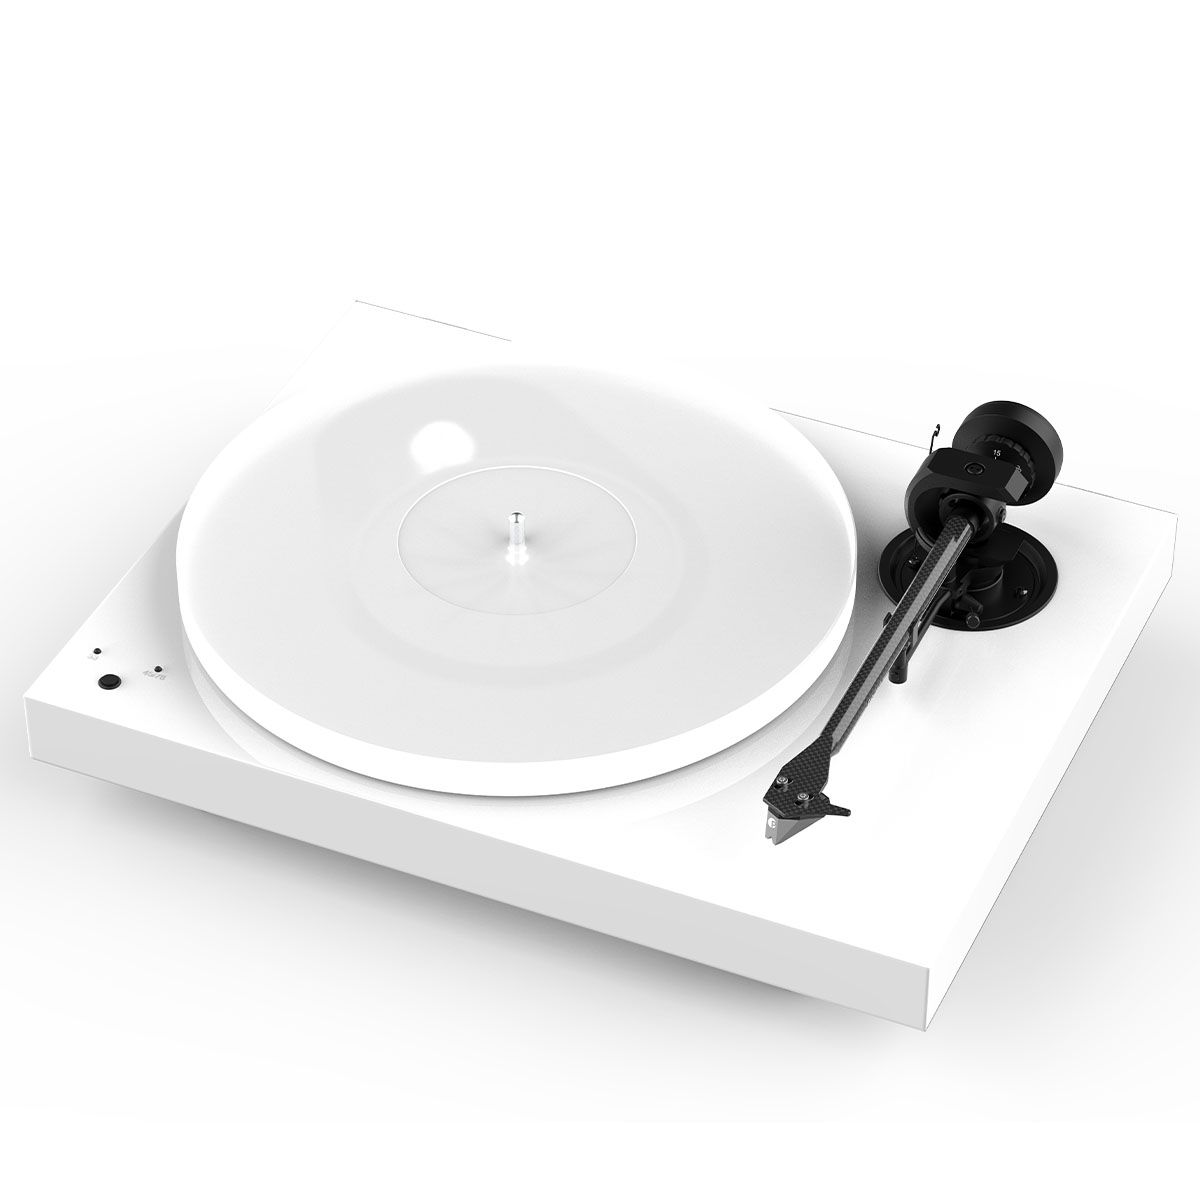 Pro-Ject X1B True Balanced Turntable - angled front view of gloss white